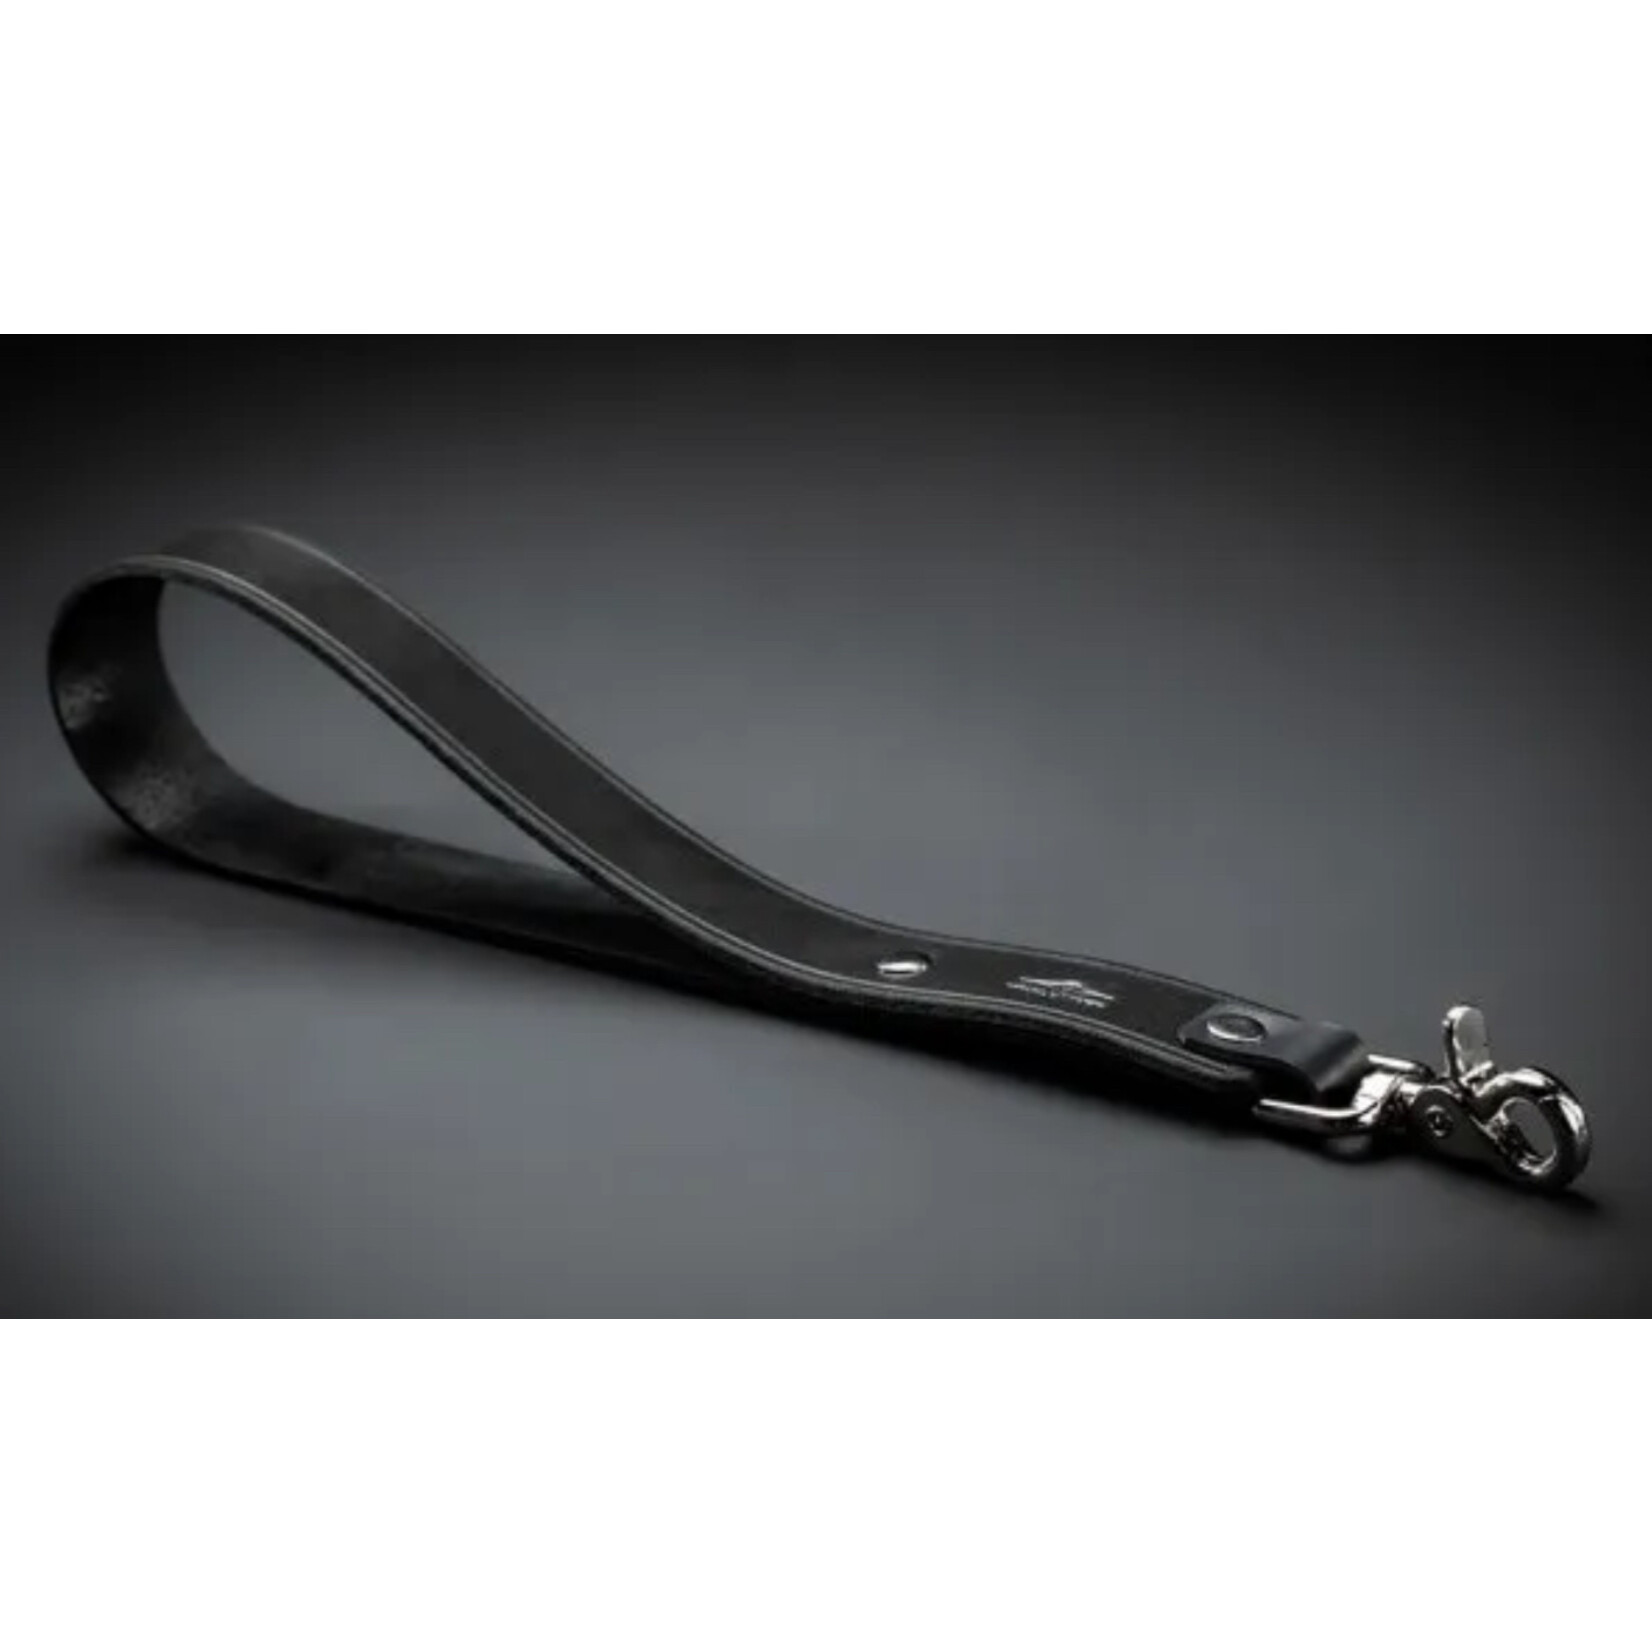 Mr. S Leather Mr. S Leather - Leather Short Leash - Black - One Size